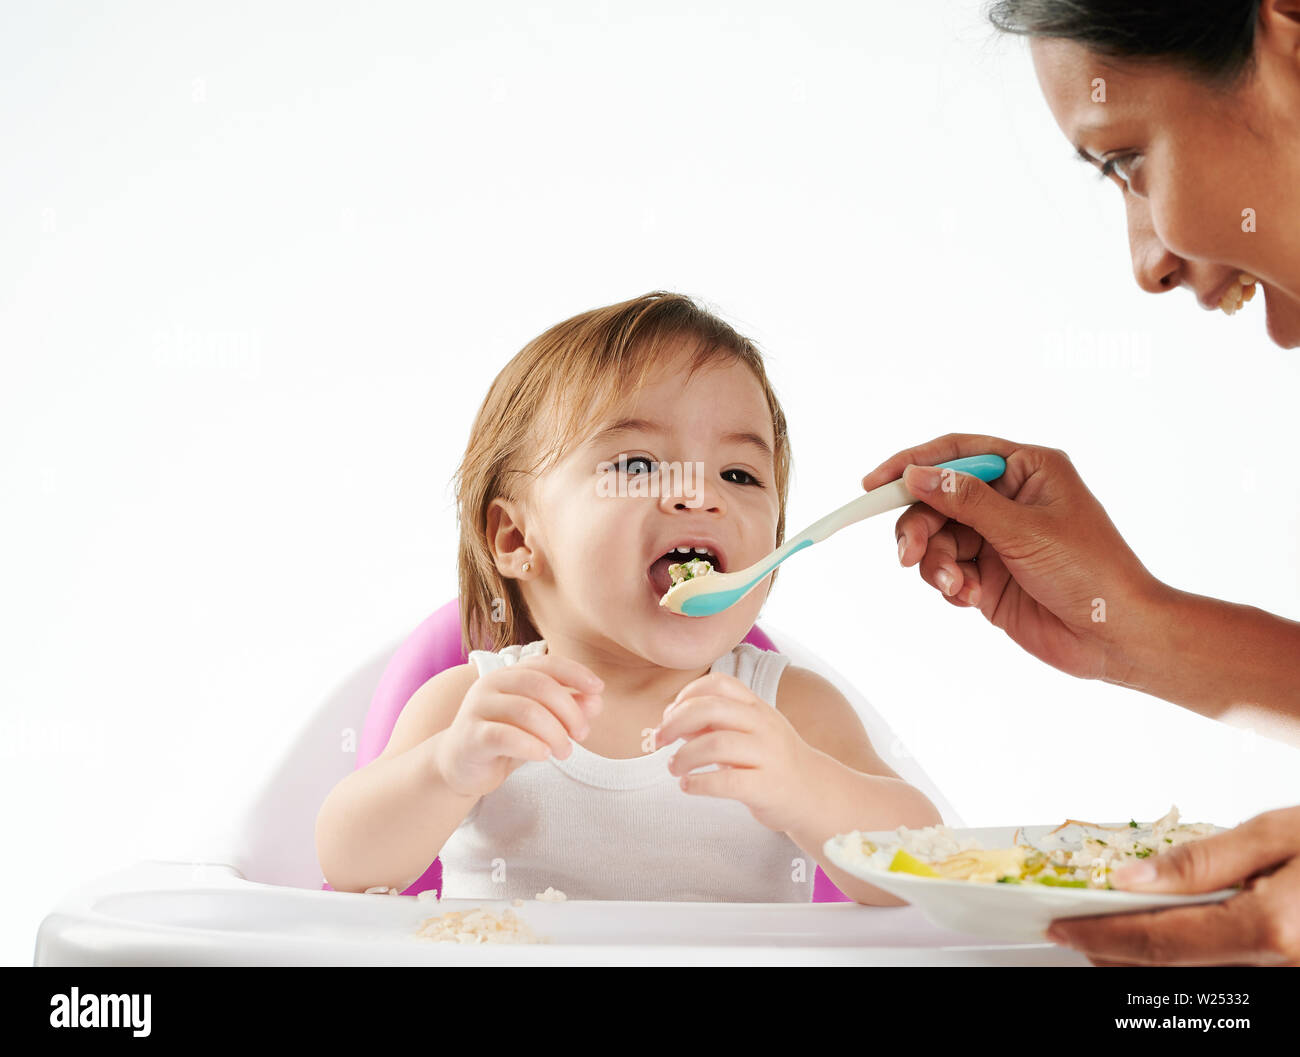 Lunch of baby girl. Mom feeding small child isolated Stock Photo